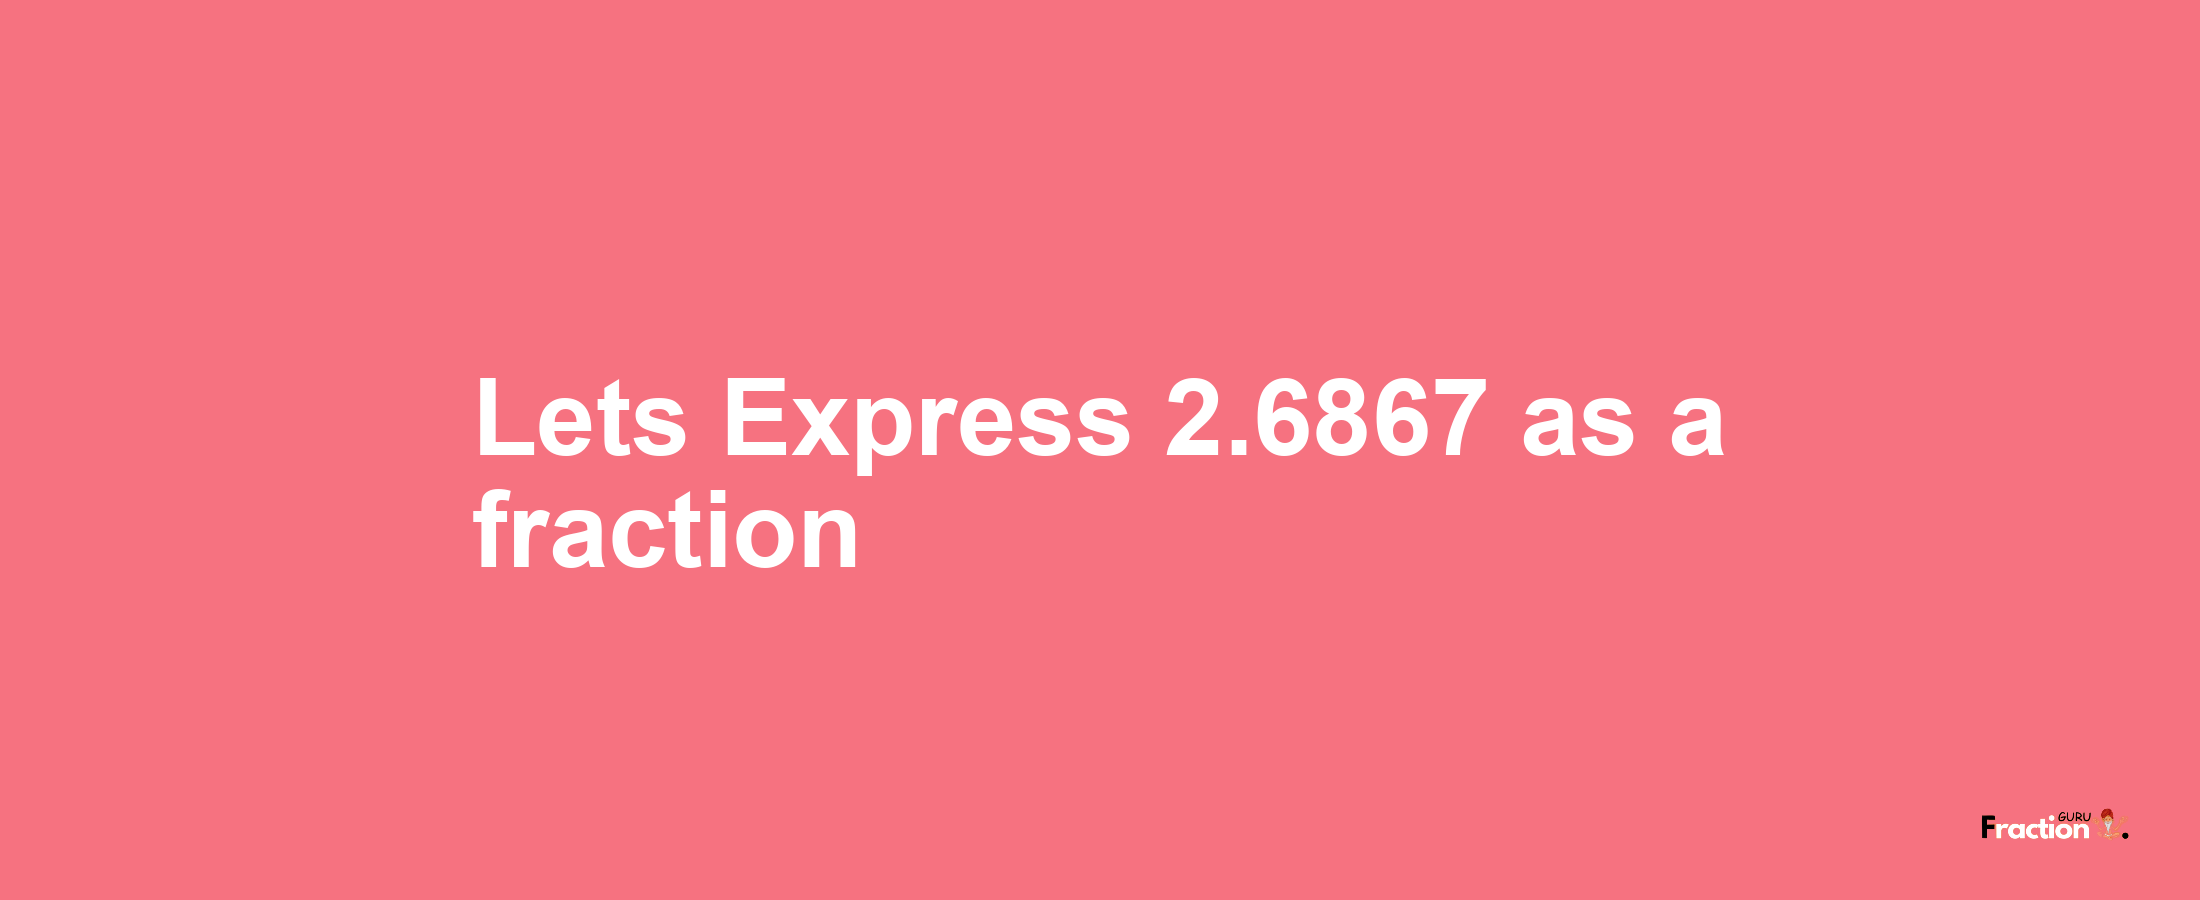 Lets Express 2.6867 as afraction